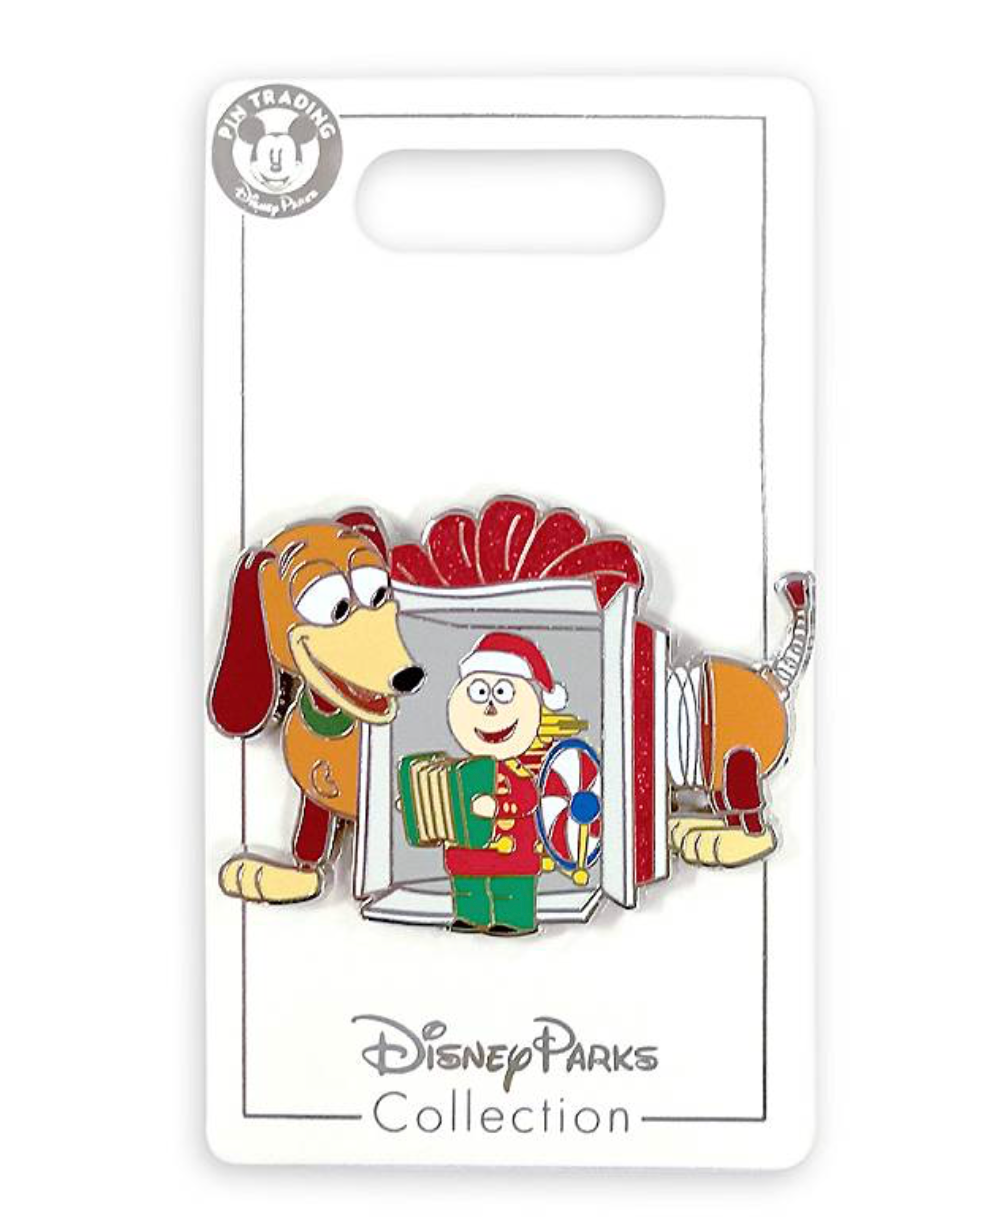 Disney Parks Toy Story Slinky Dog and Tinny Christmas Holiday Pin New with Card